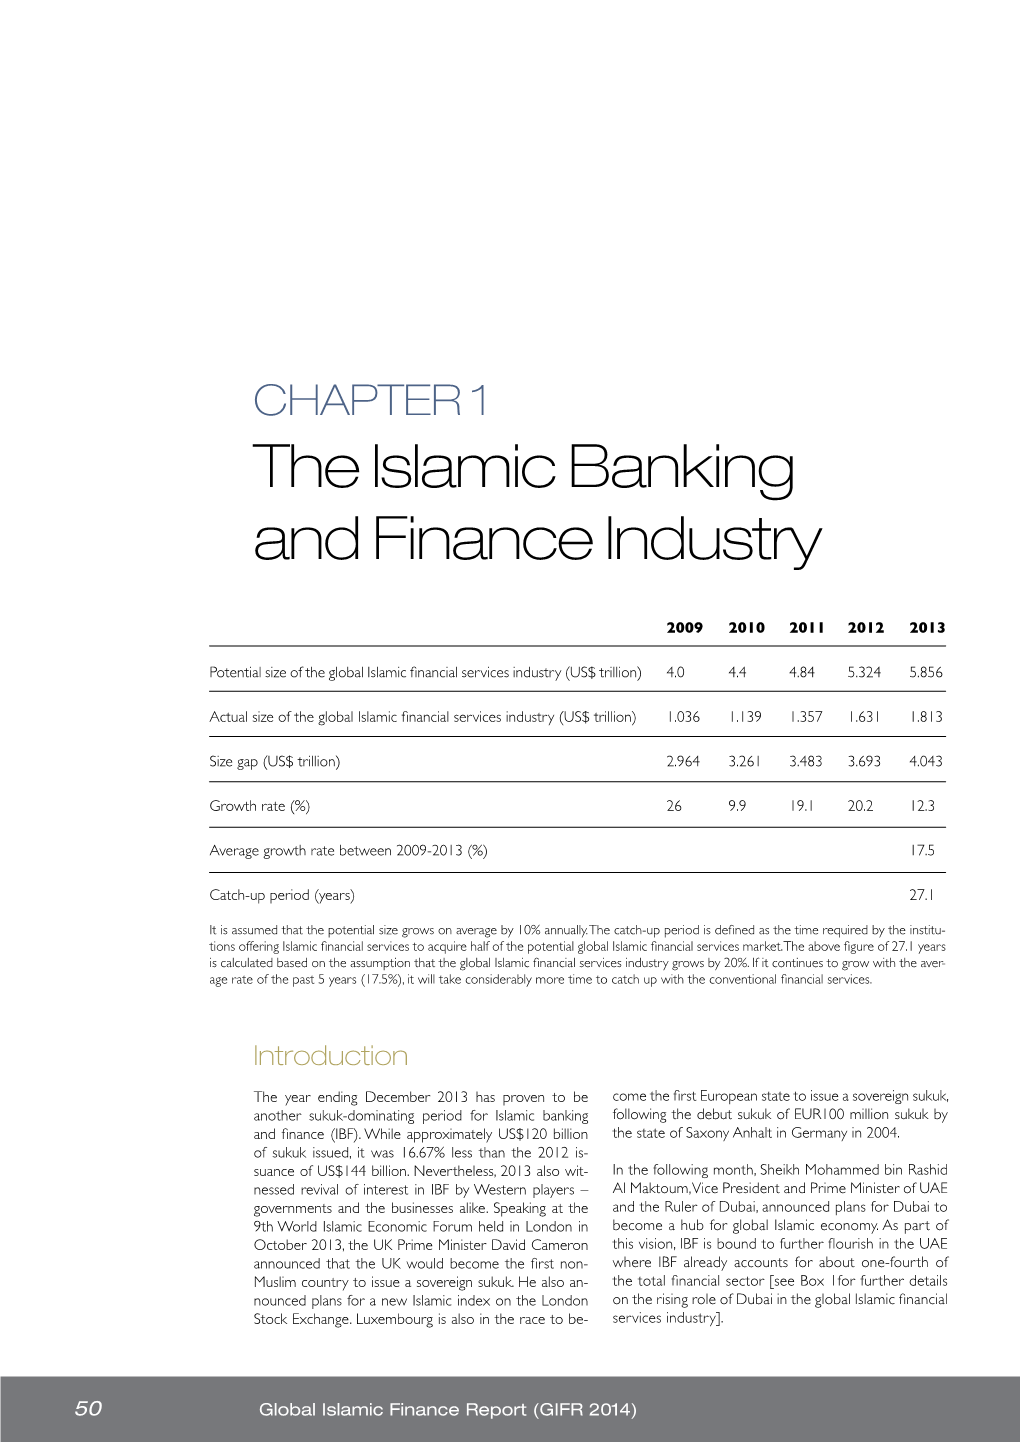 The Islamic Banking and Finance Industry